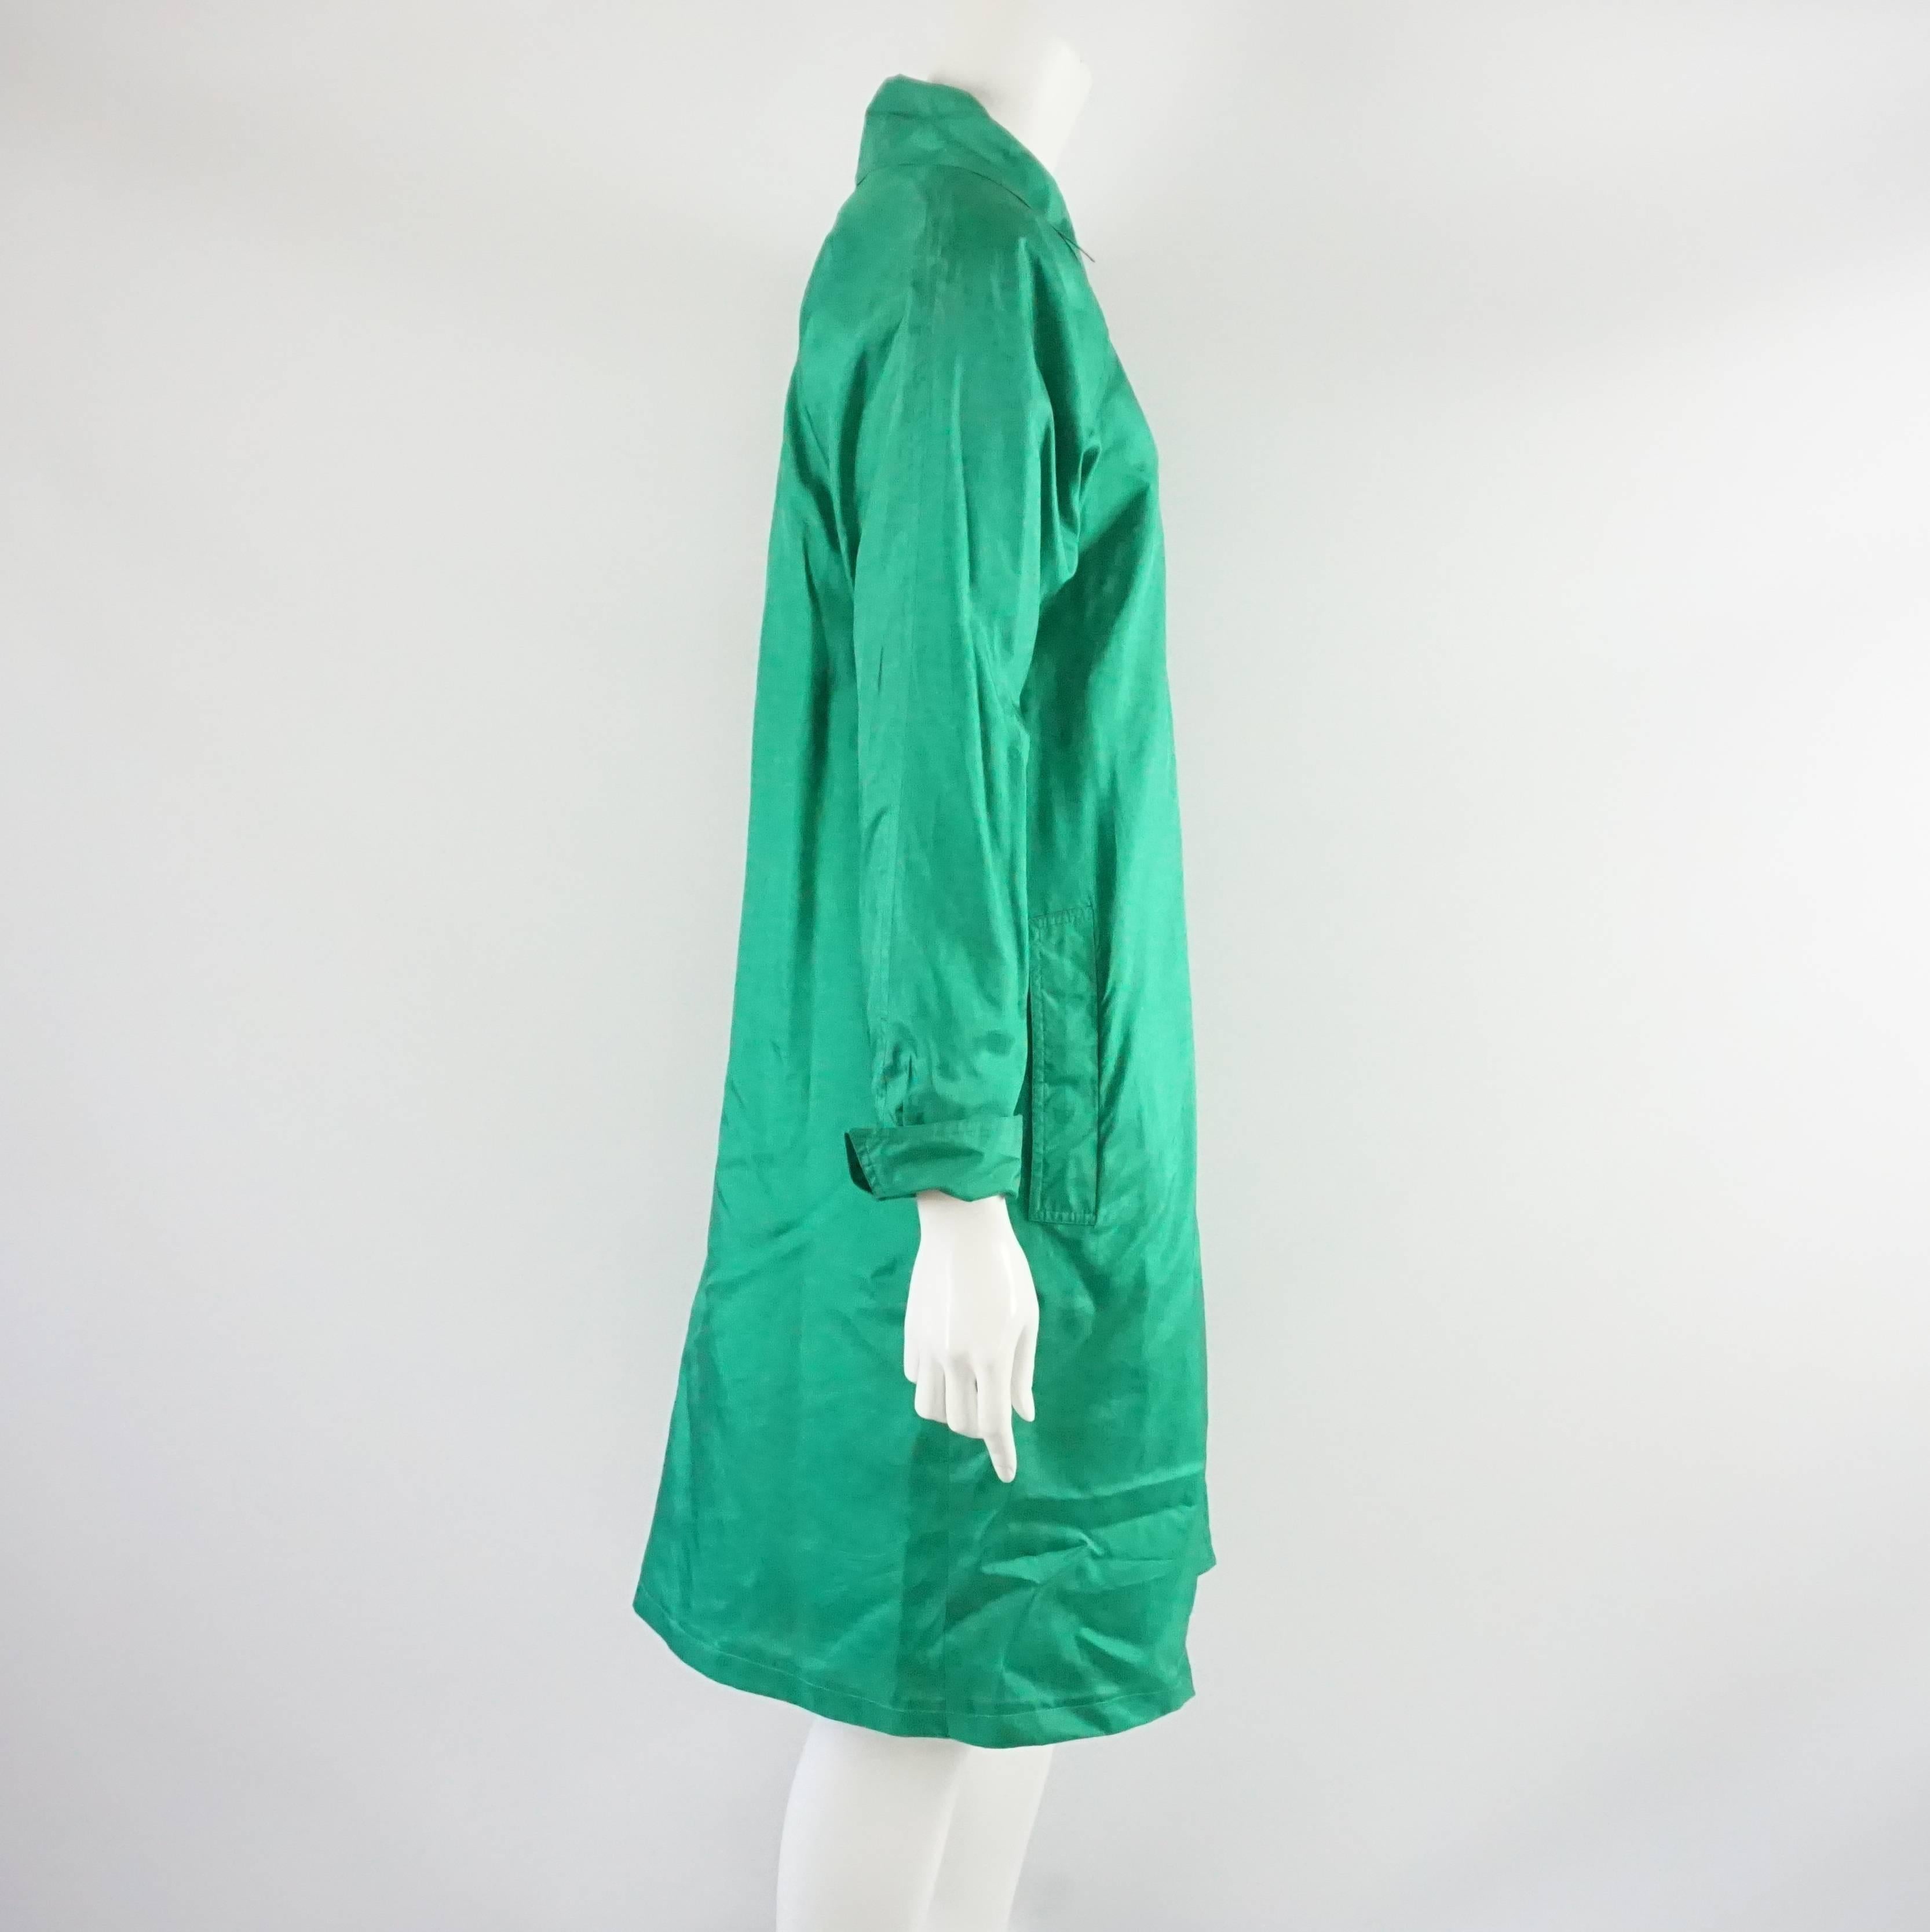 This vintage Carmen's Hilldale coat is a bright Kelly green color. The piece is made of silk and is in the style of a rain coat. It is in excellent vintage condition with minor staining. Size M, circa 1970’s. 

Measurements
Shoulder to Shoulder: